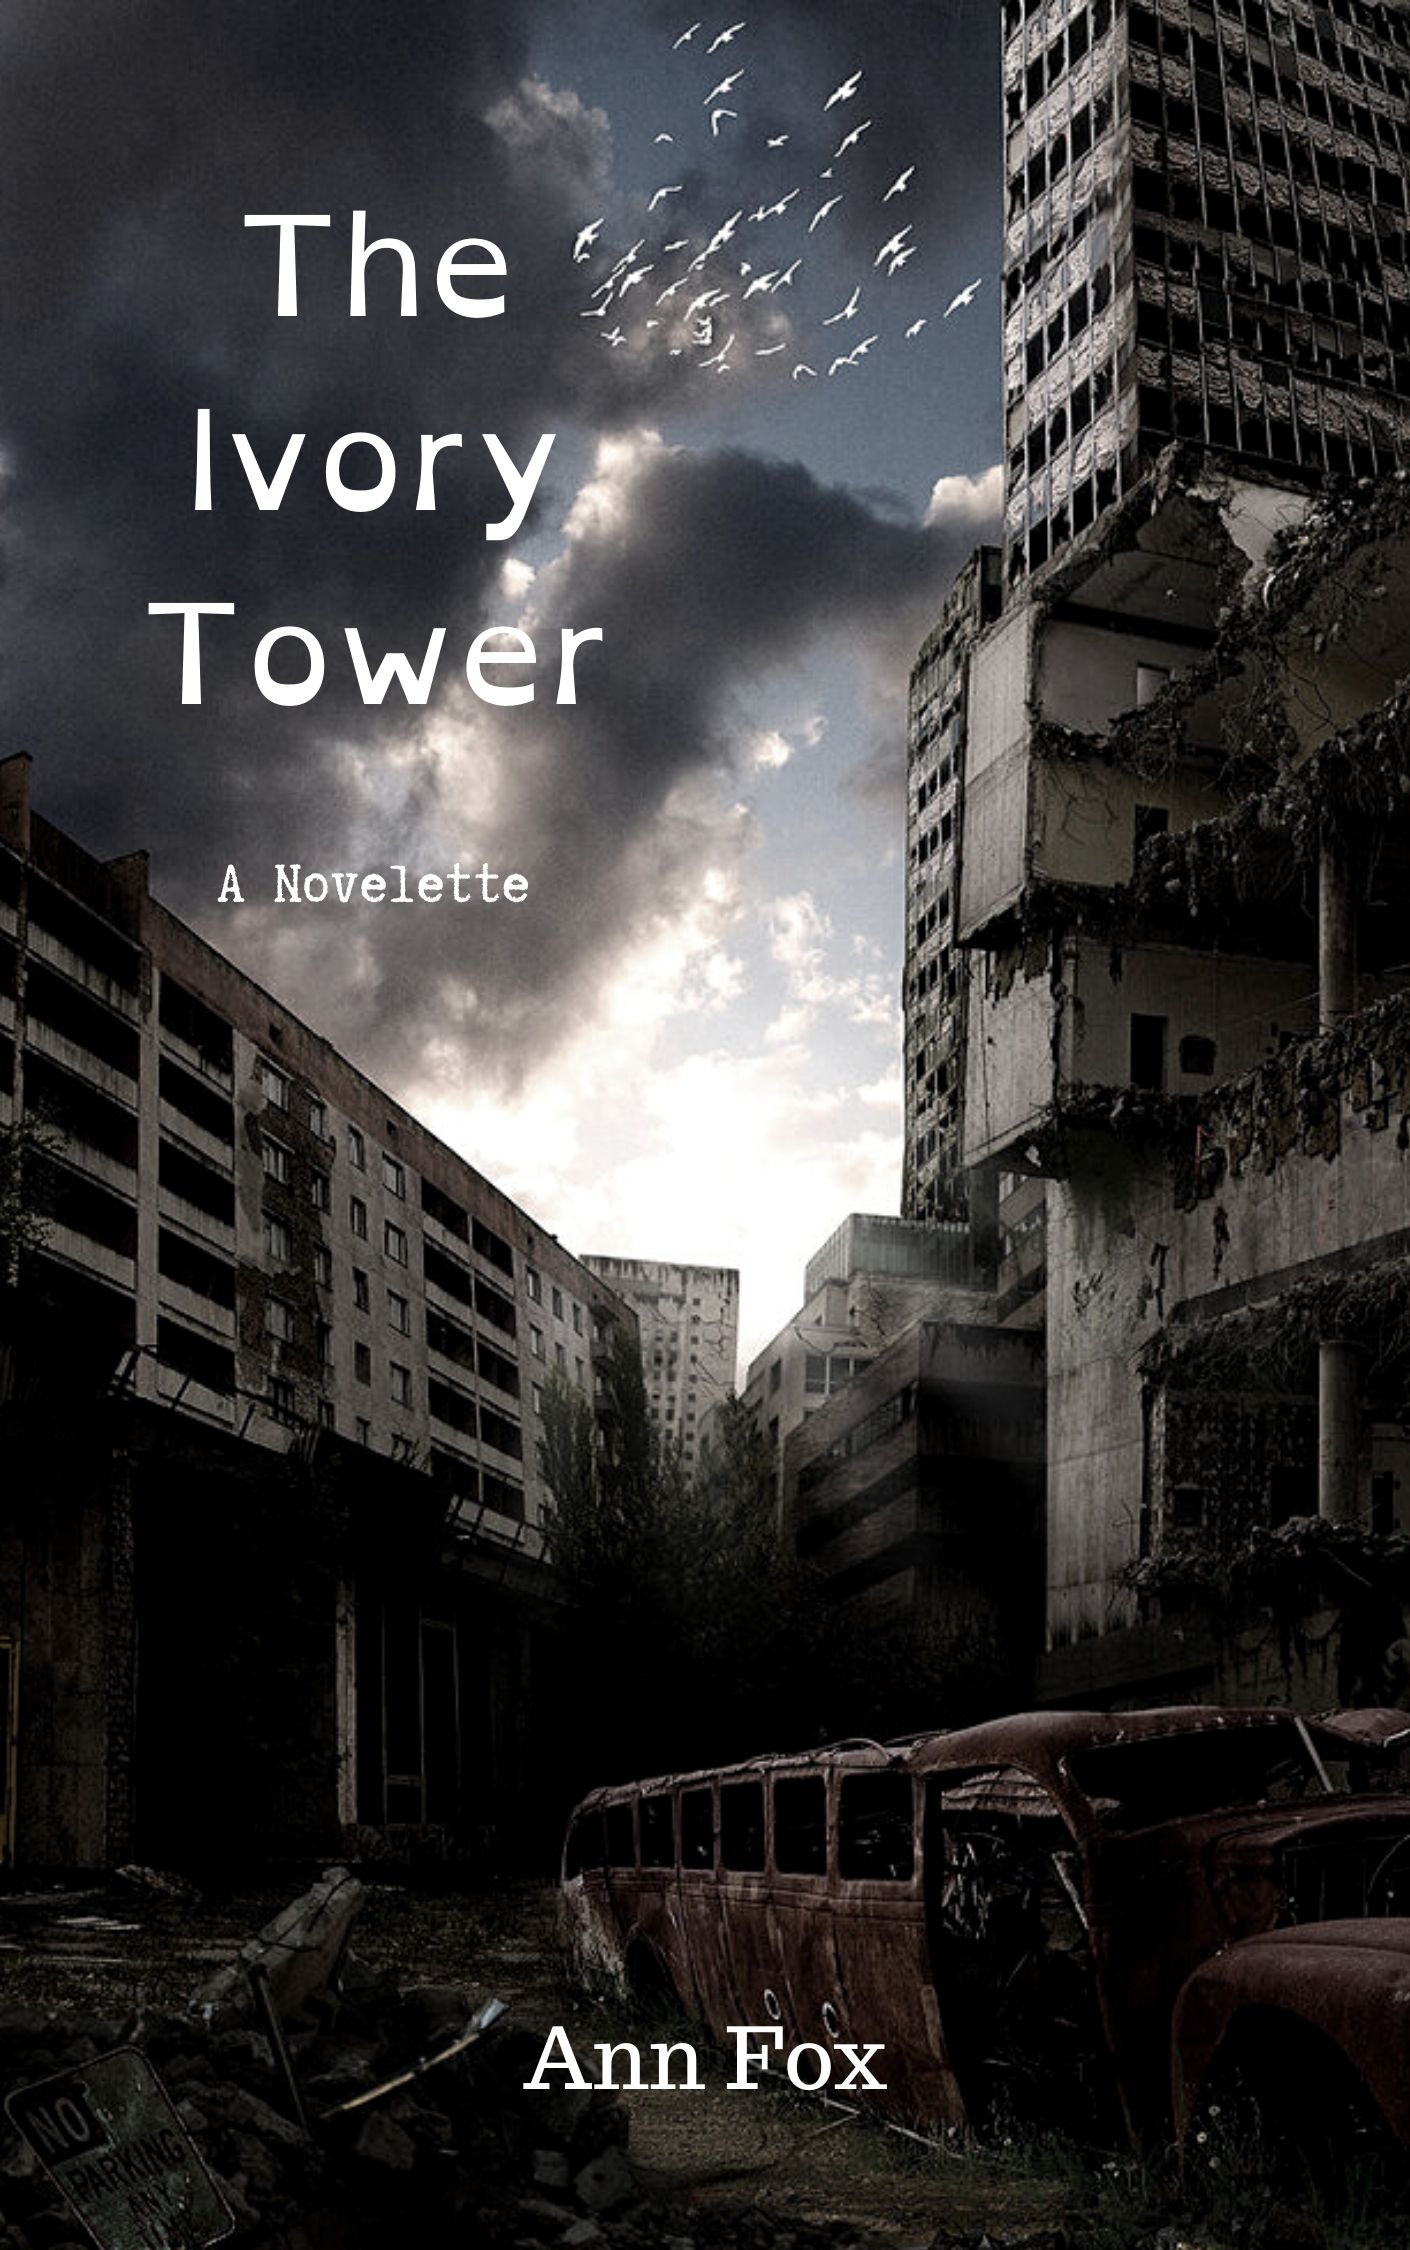 The Ivory Tower ebook (1)